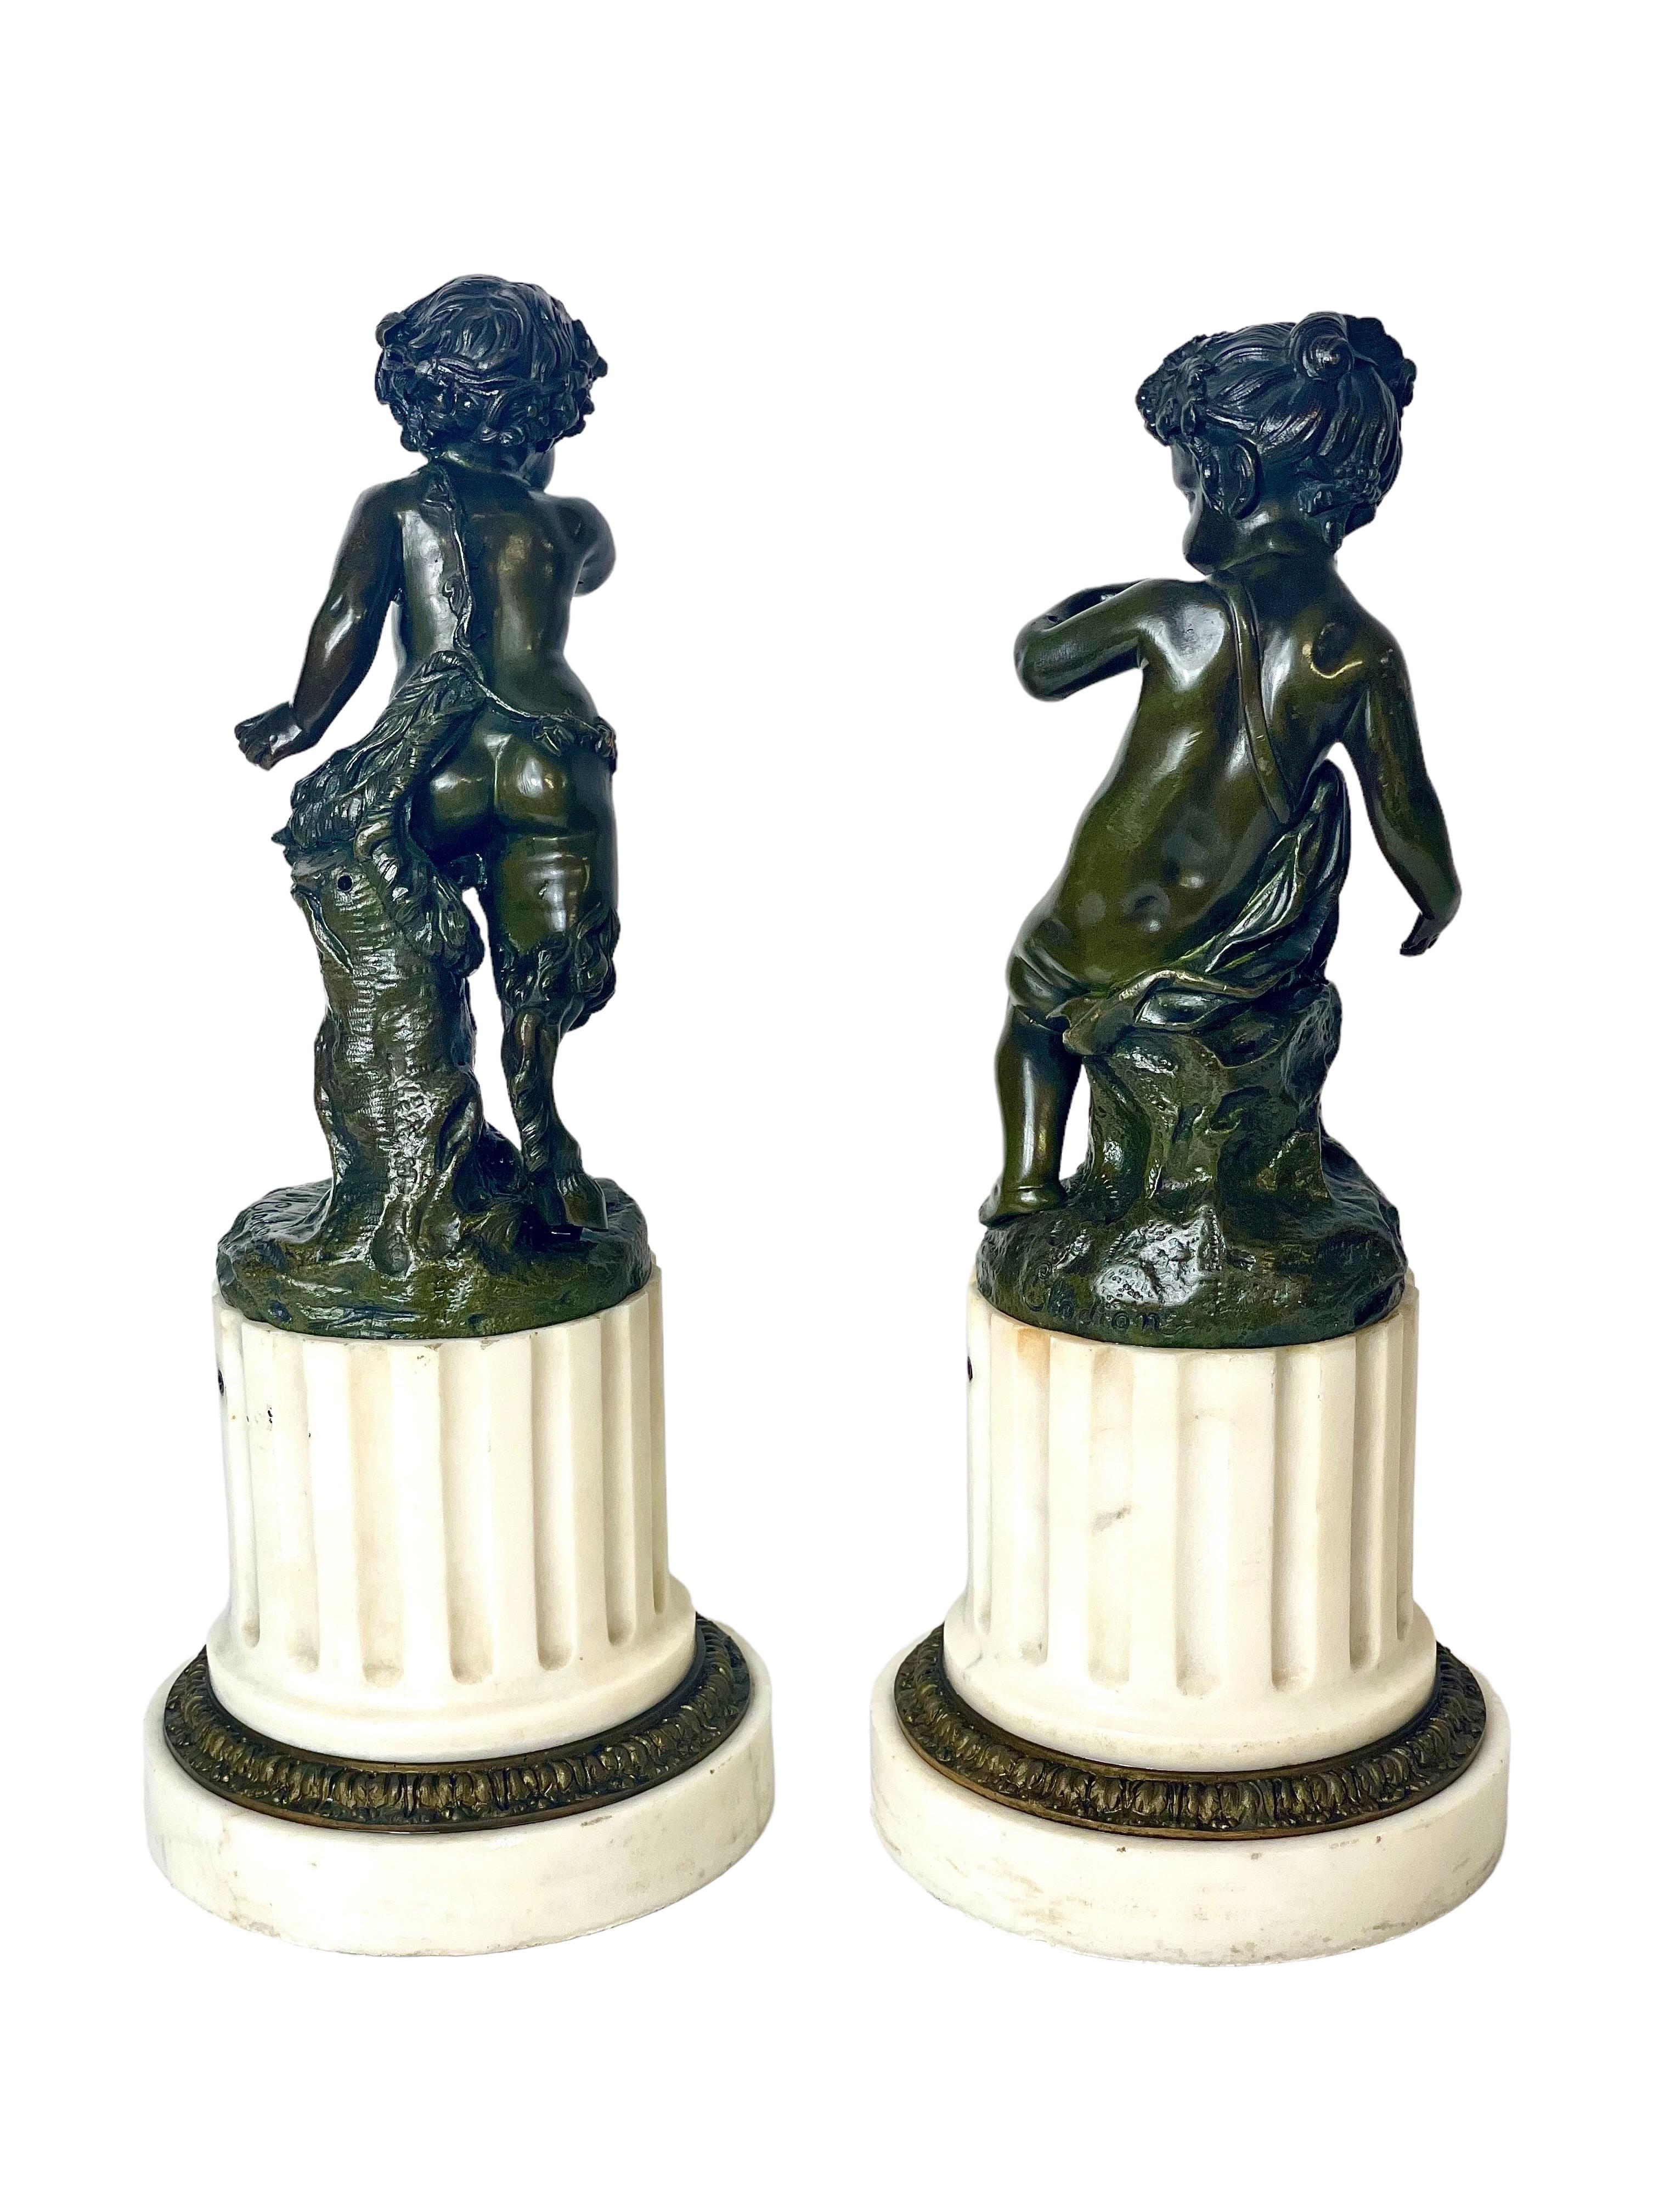 A delightful pair of patinated bronze statuettes, originally candelabra, after Clodion (Claude Michel Clodion 1738 – 1814), depicting a young satyr and satyress. Mounted on truncated columns of fluted white marble, and marked with the Clodion